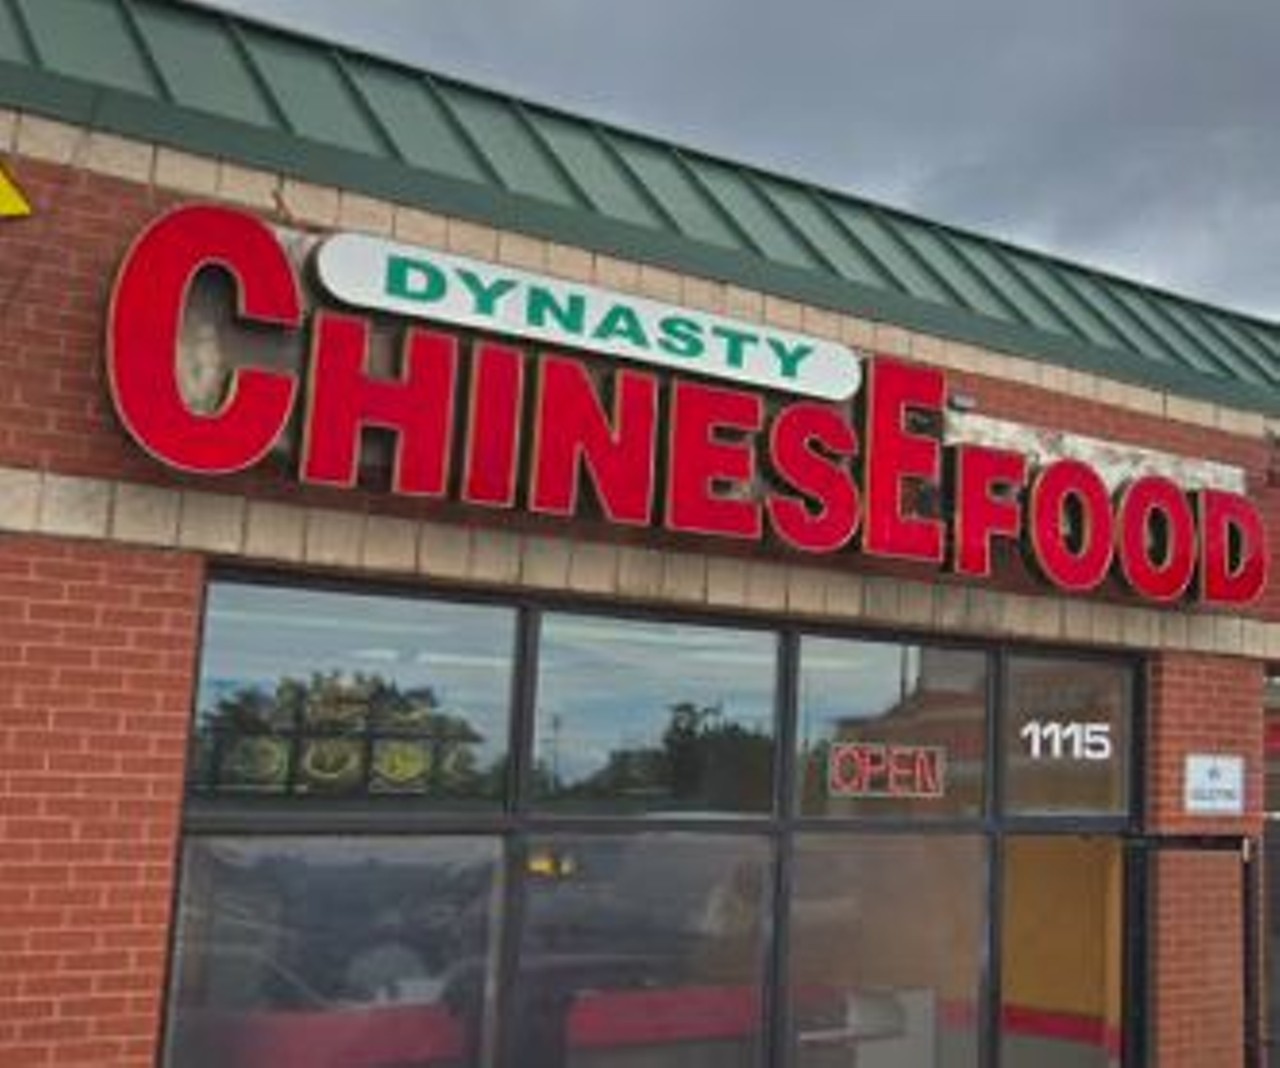 Dynasty Chinese
1115 W. Warren Ave., Detroit; 313-832-8999; dynastydetroit.com
Dynasty Chinese is an affordable location often frequented by Wayne State students. No one knows good, cheap Chinese takeout like a college kid.
Photo via Google Maps